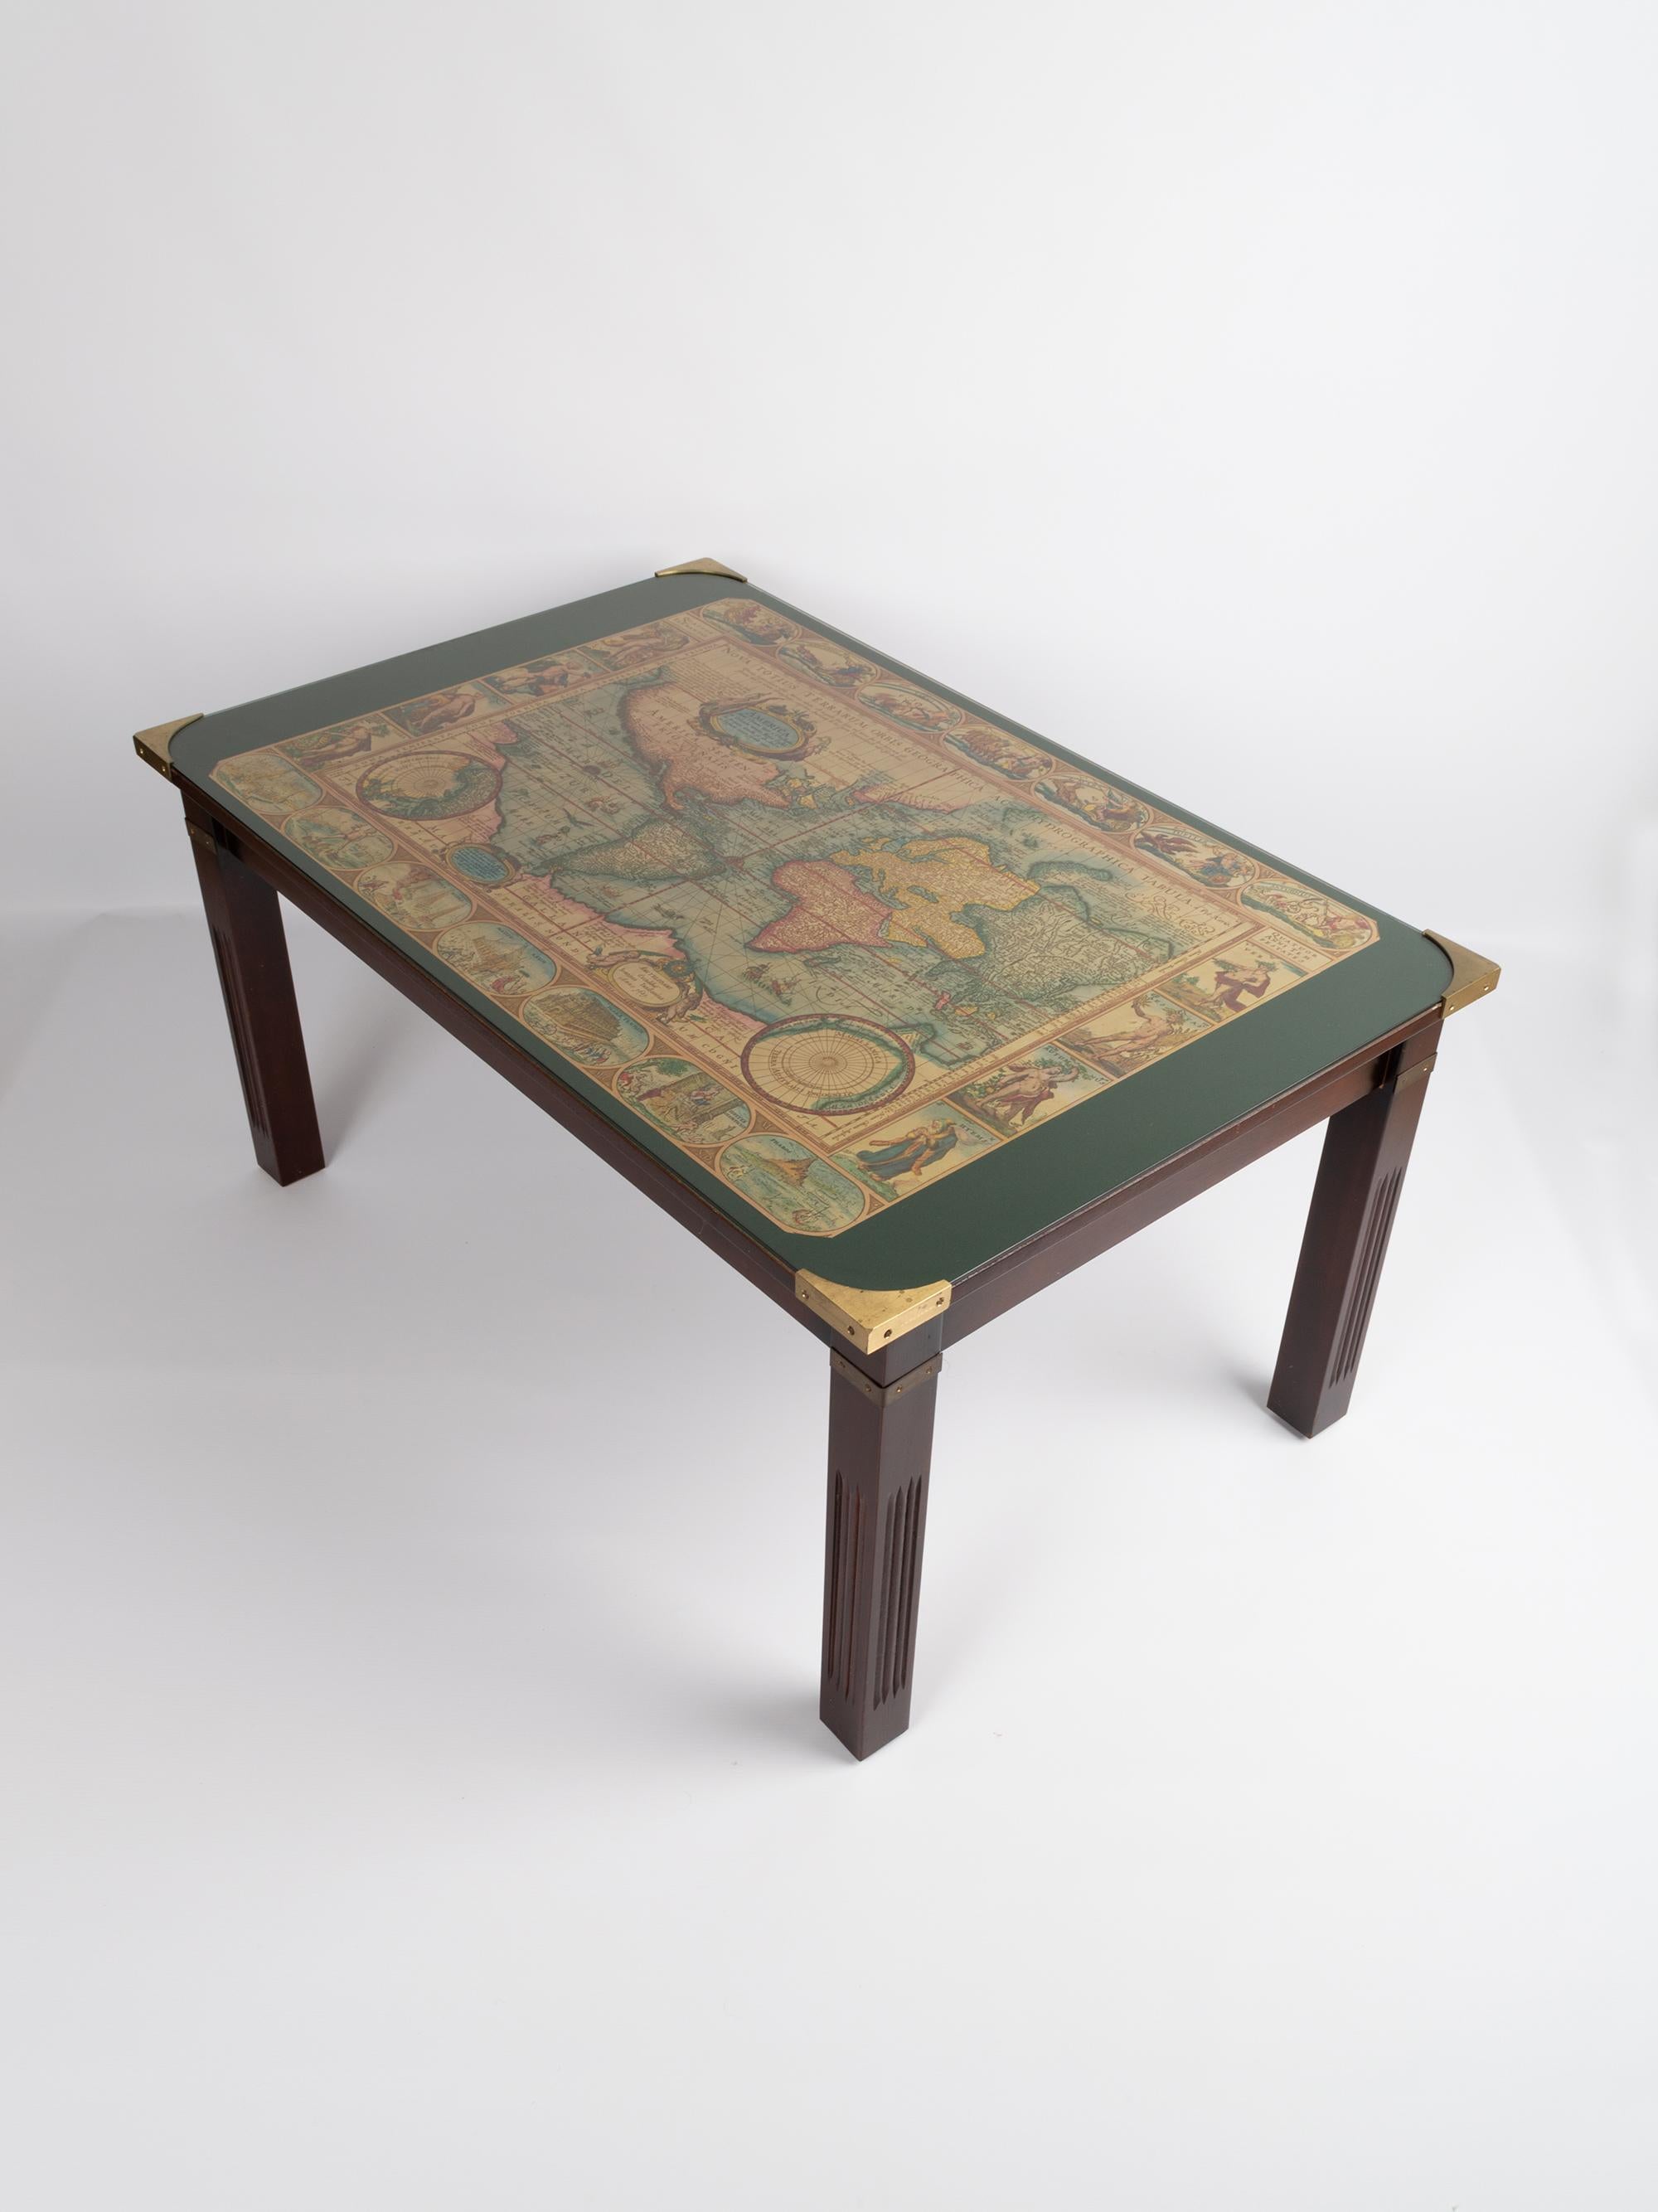 Vintage World Map Military Campaign coffee table by Maison Jansen, France, circa 1960.
Verre églomisé map image with mahogany table frame and brass detailing.
Very good vintage condition commensurate of age.